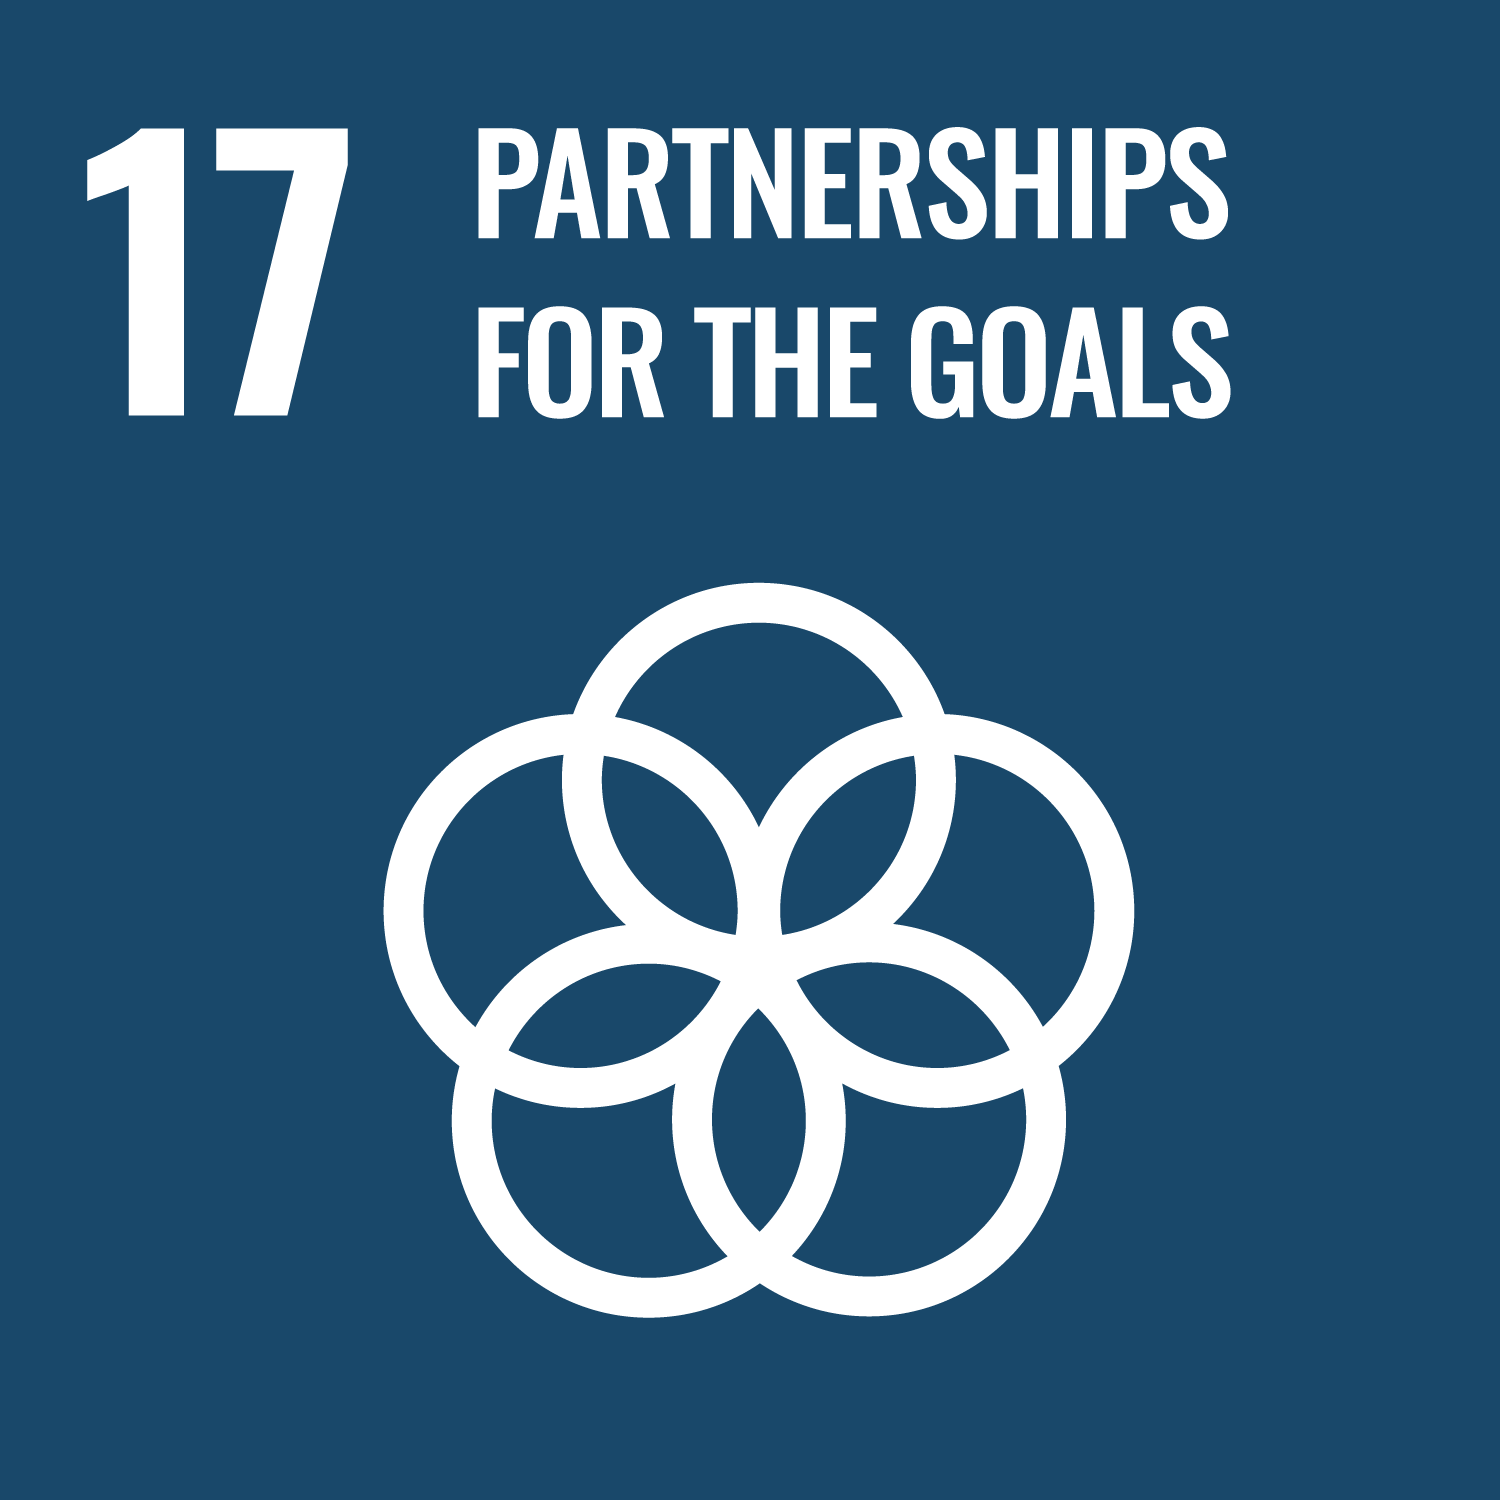 sustainable-development-goals-partnership-for-the-goals